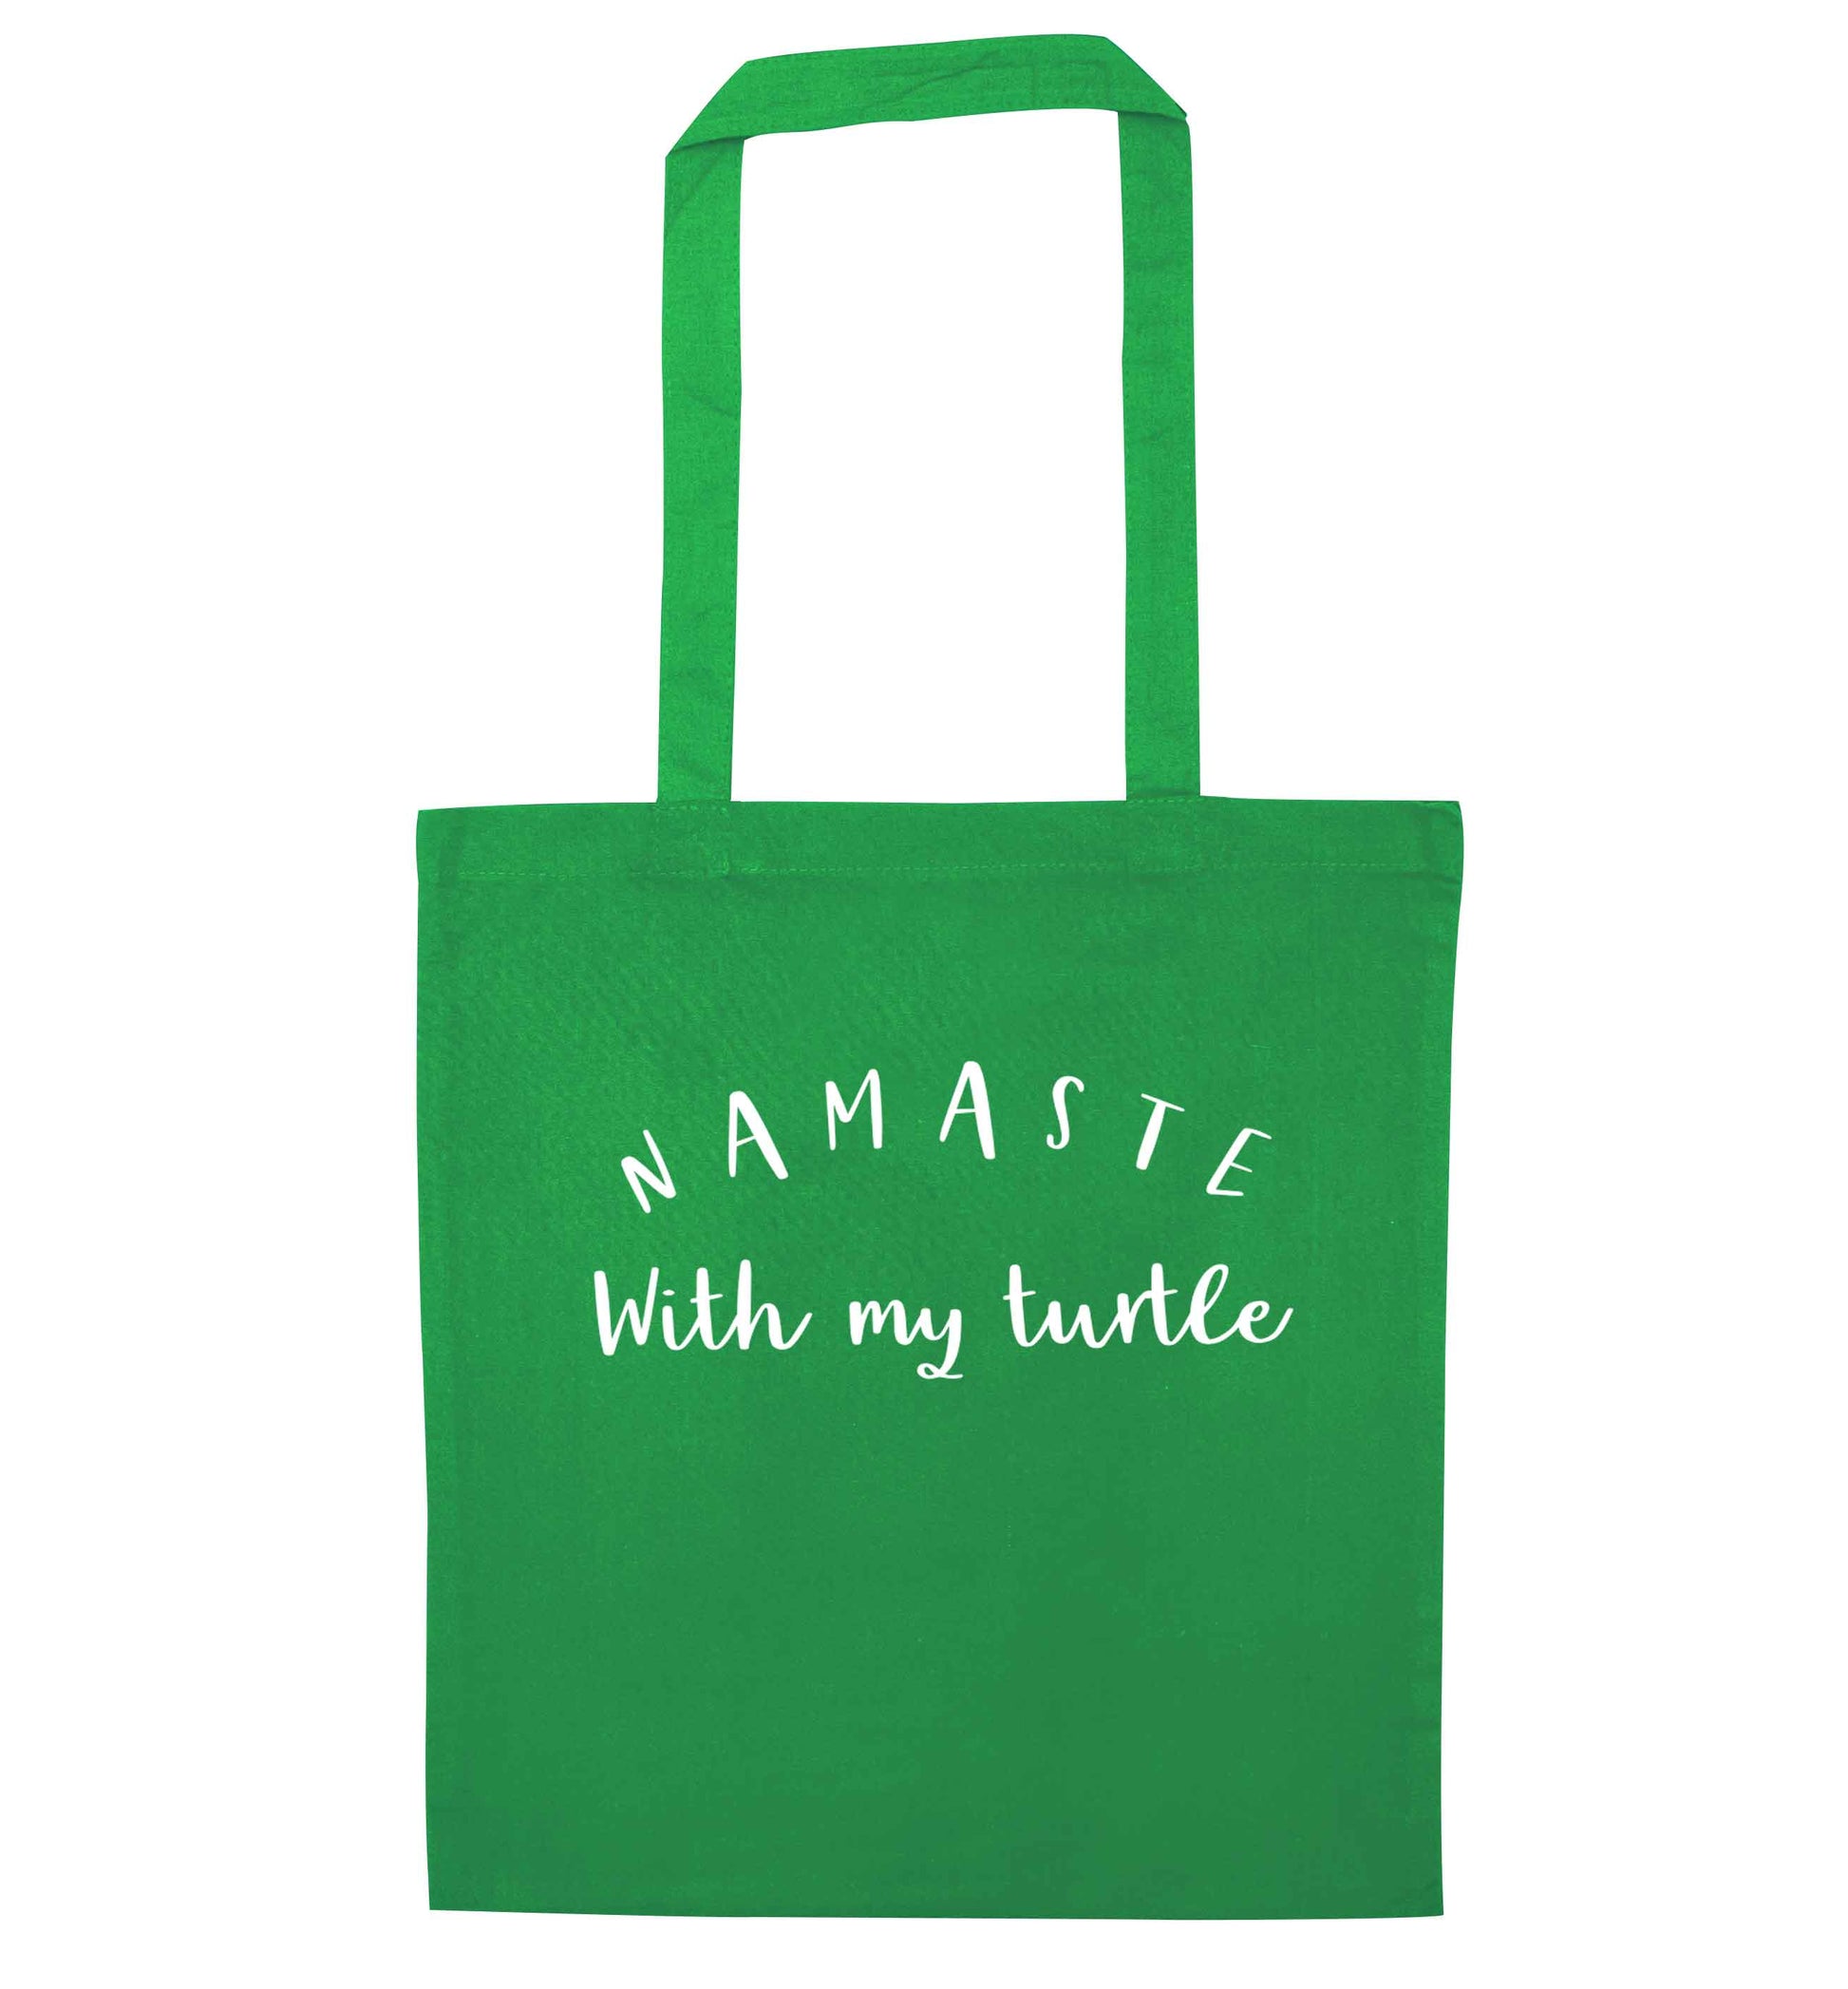 Namaste with my turtle green tote bag